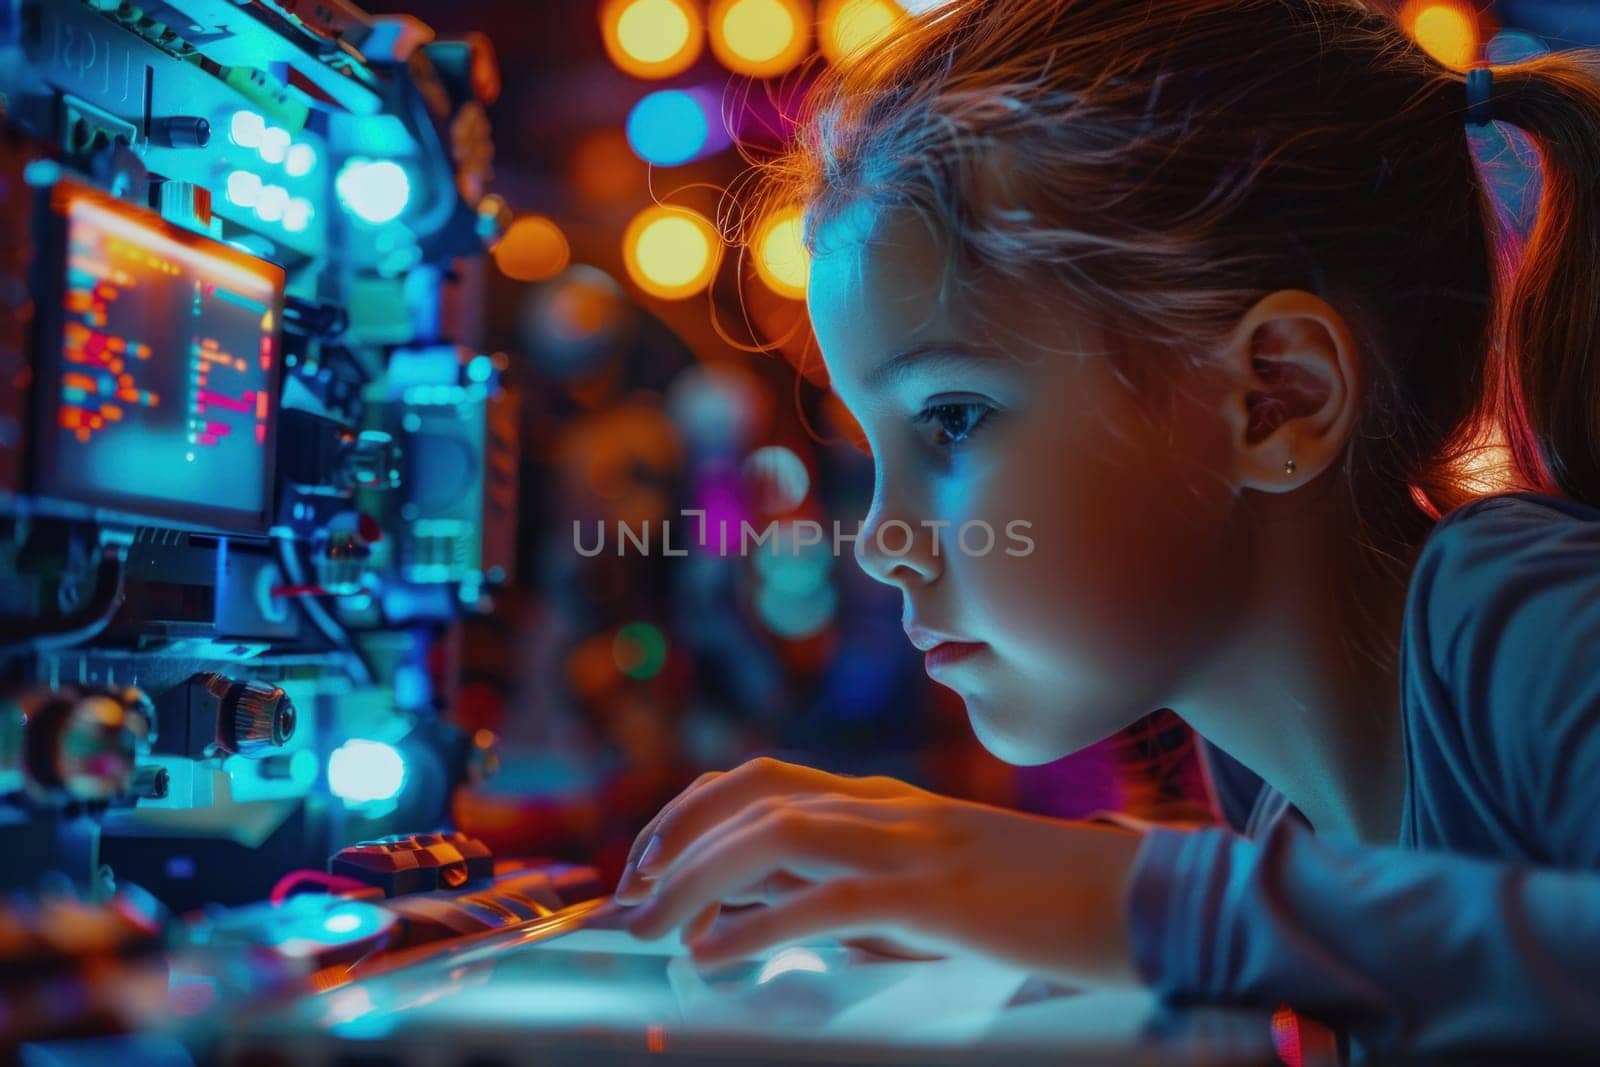 Young Girl Using Laptop in Brightly Lit Room by but_photo